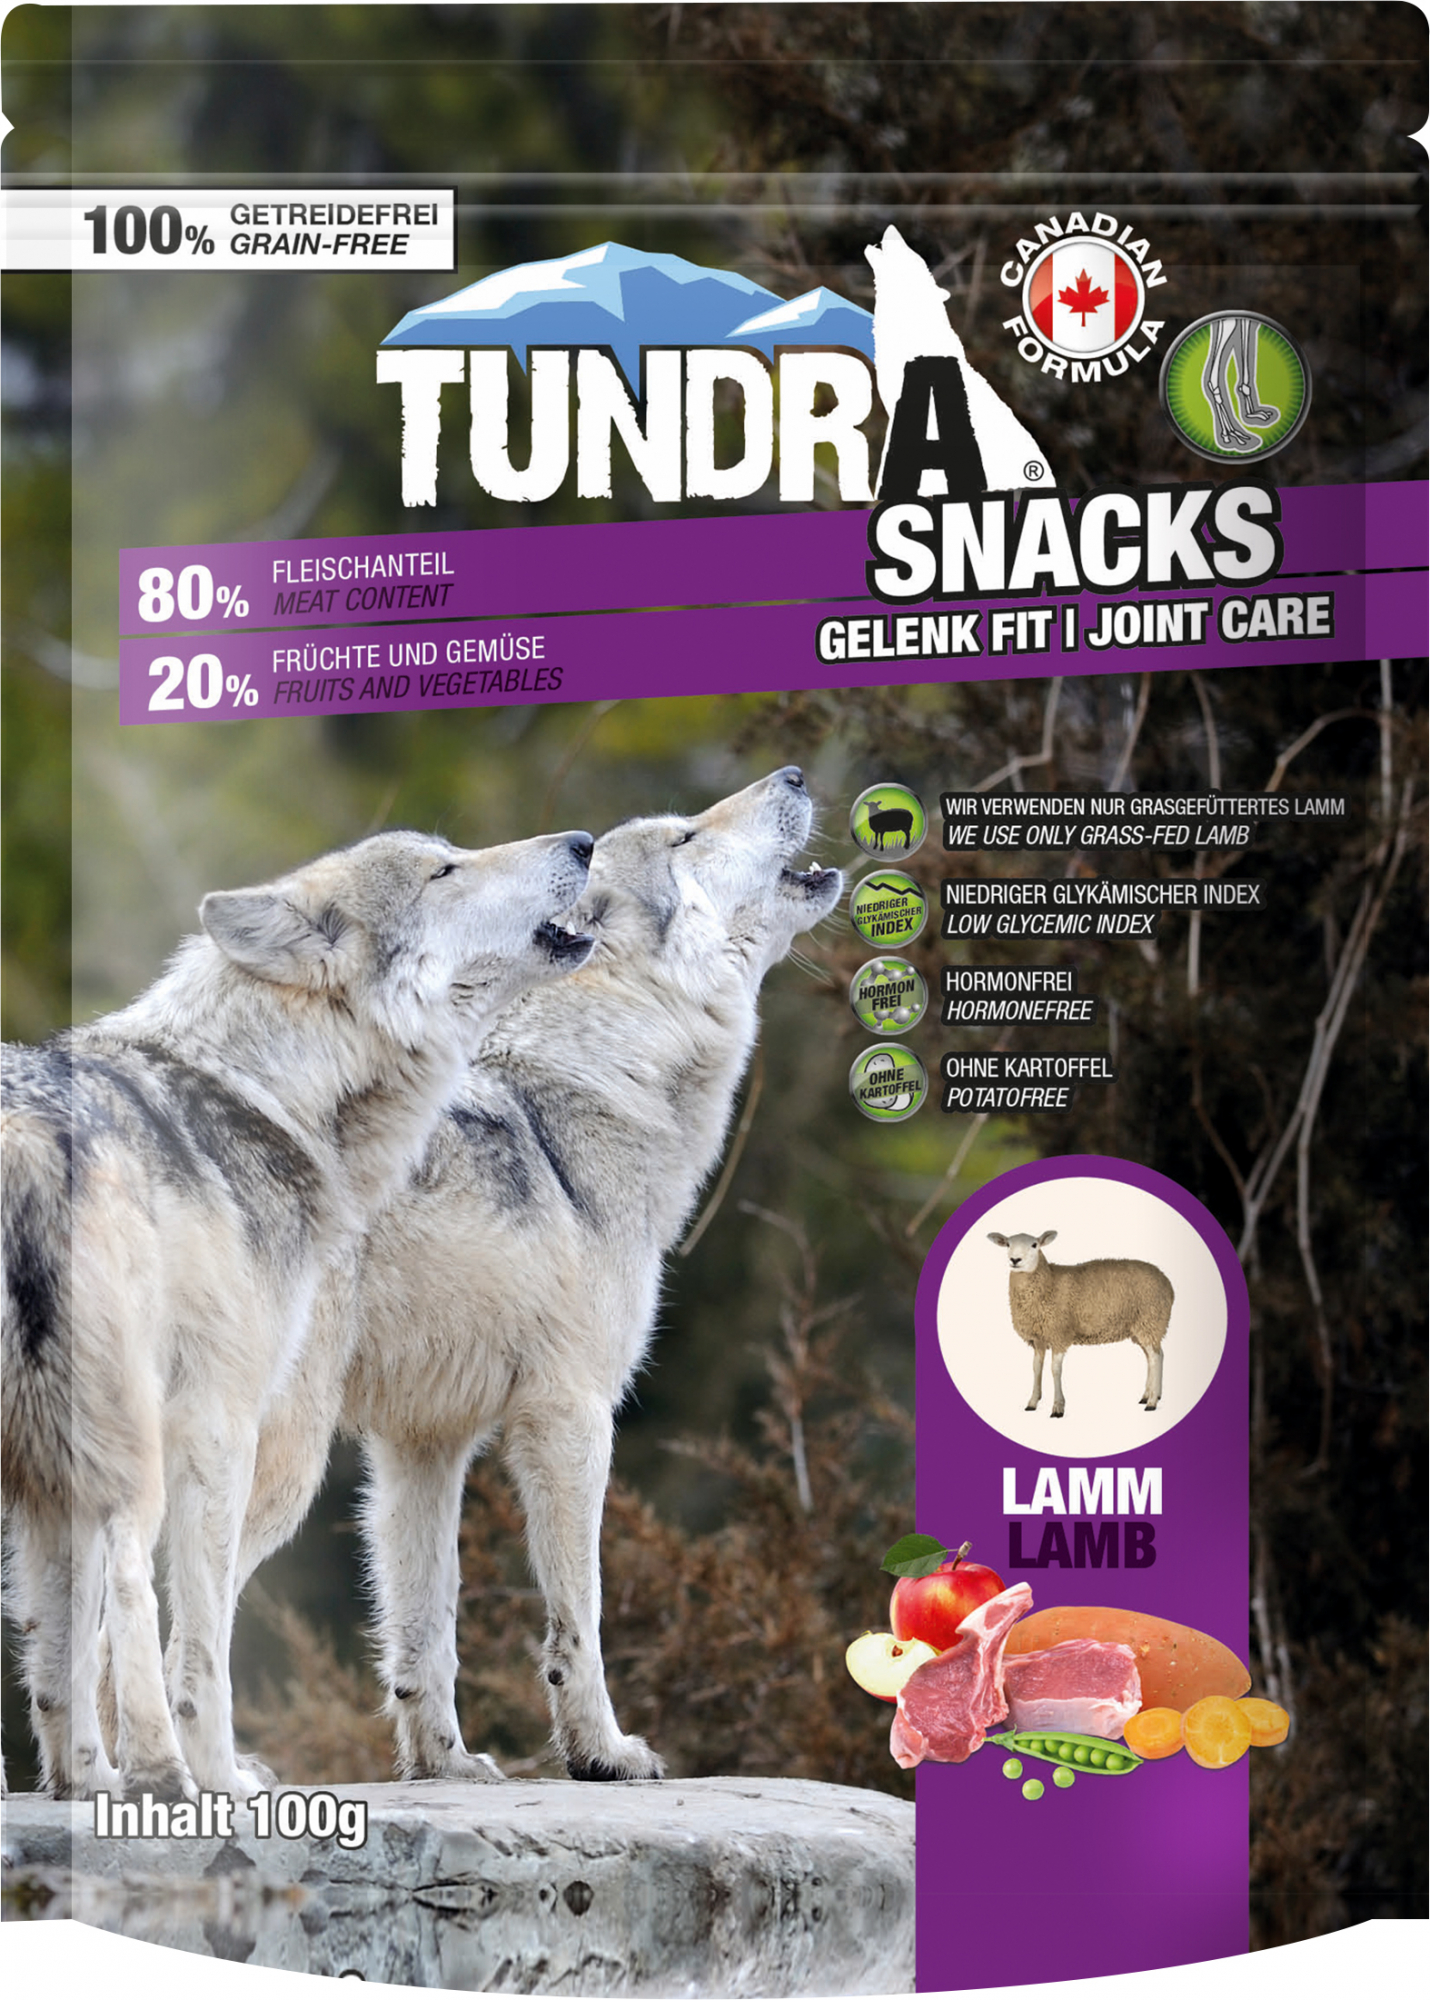 TUNDRA Snack Joint Care met lam